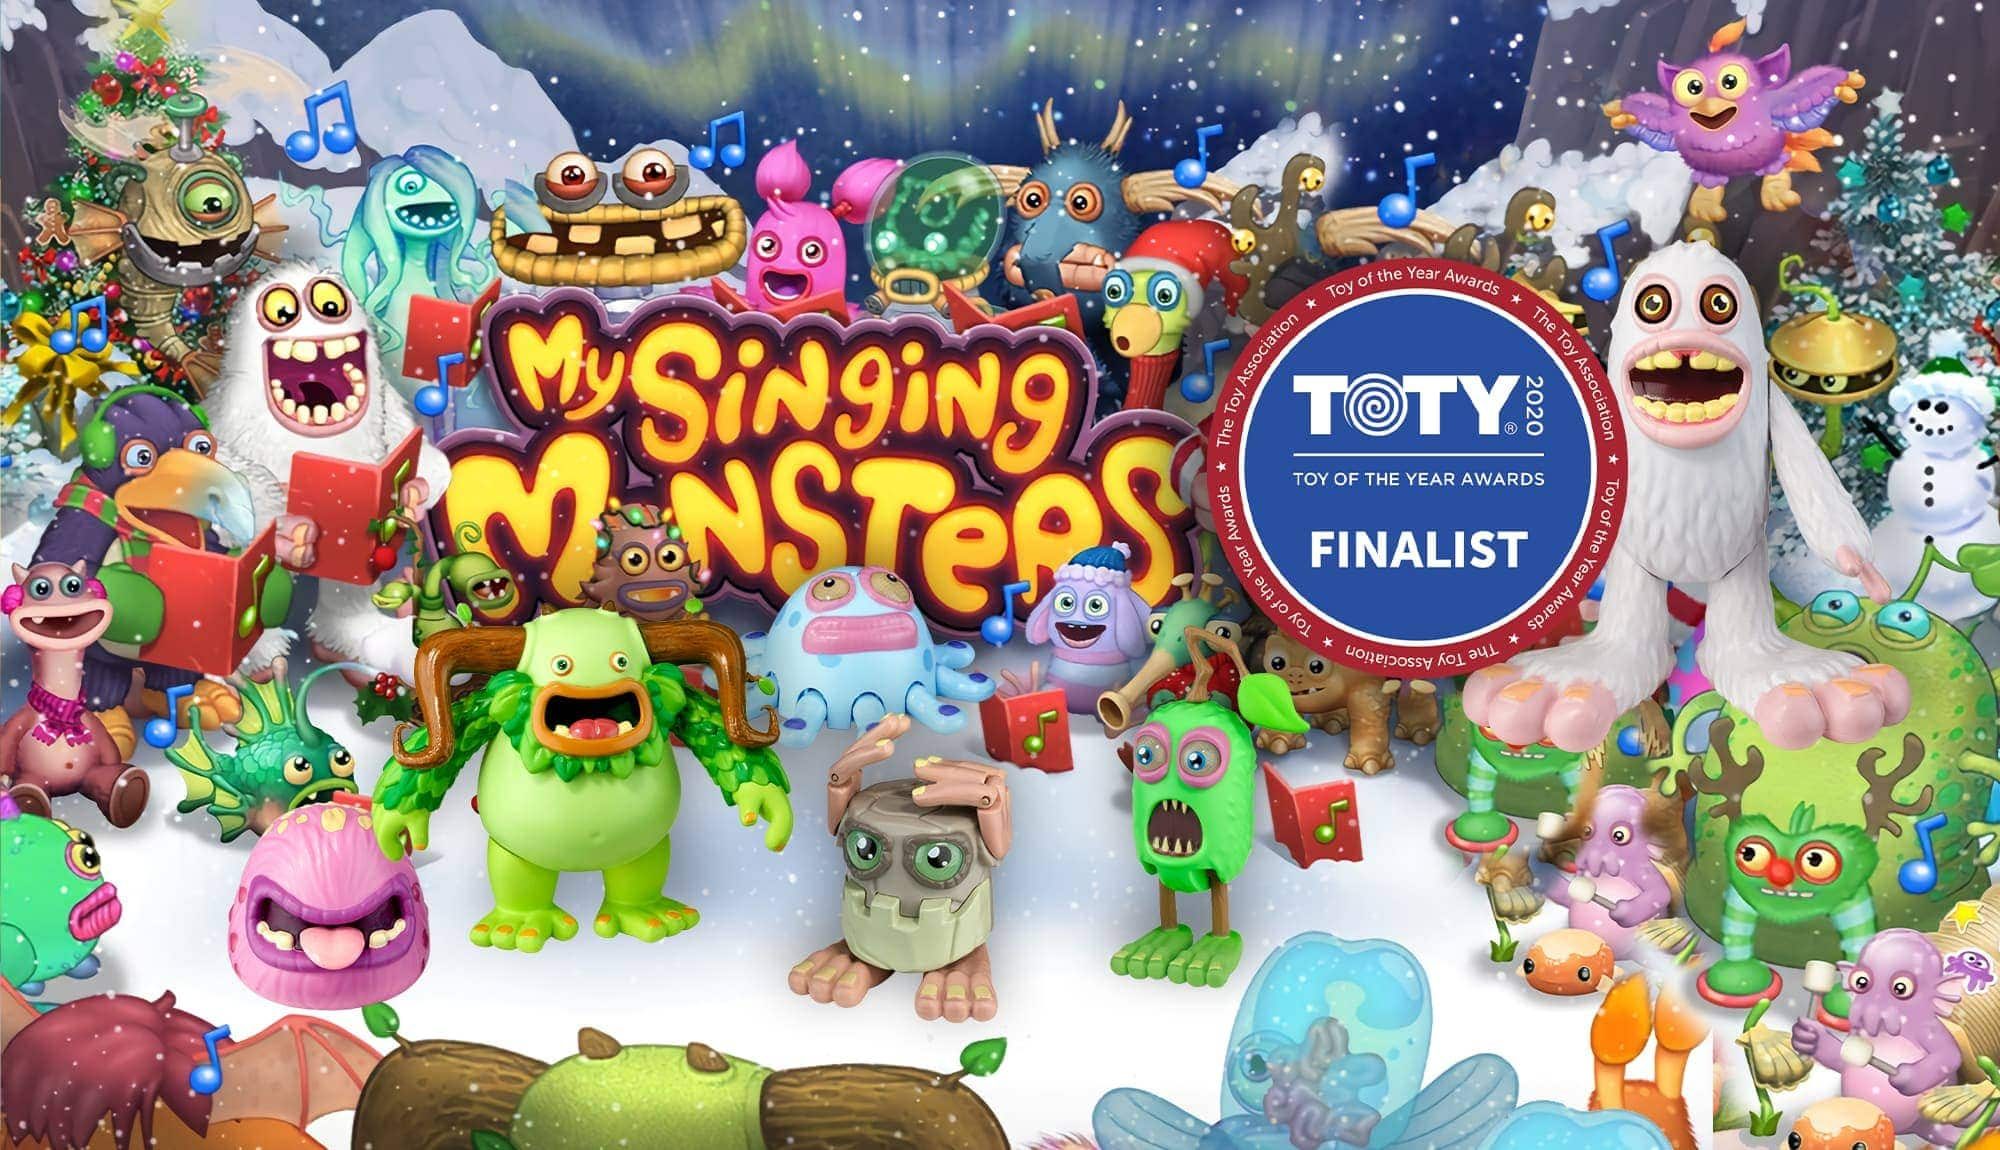 We’re Nominated for a Toy of the Year Award!